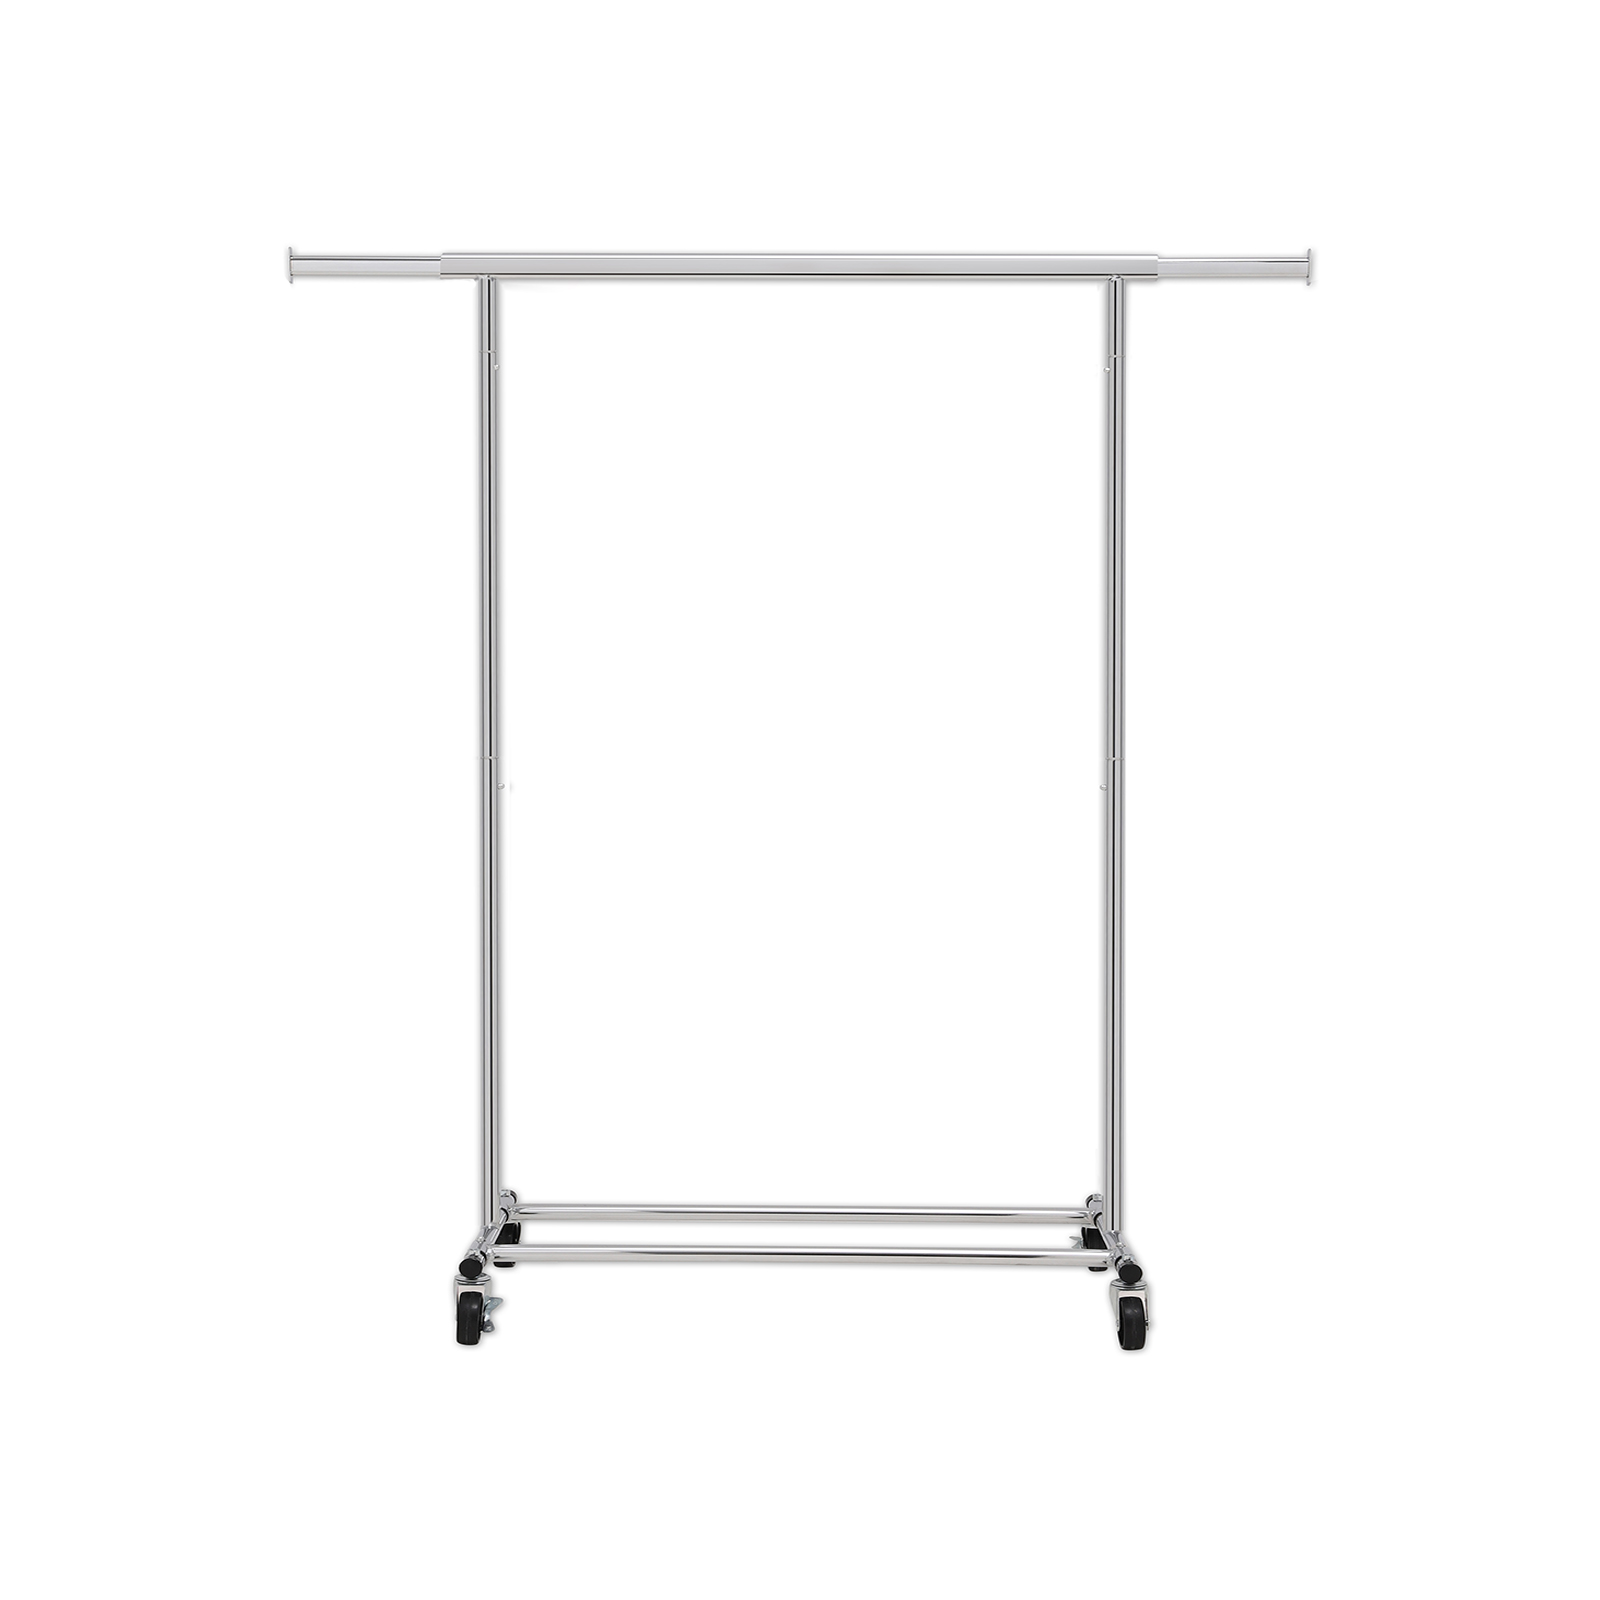 Holds up to 70 kg SONGMICS Clothes Rack on Wheels Bottom Storage Shelf with Extendable Hanging Rail Collapsible Heavy-Duty Garment Rack Black HSR13BK 